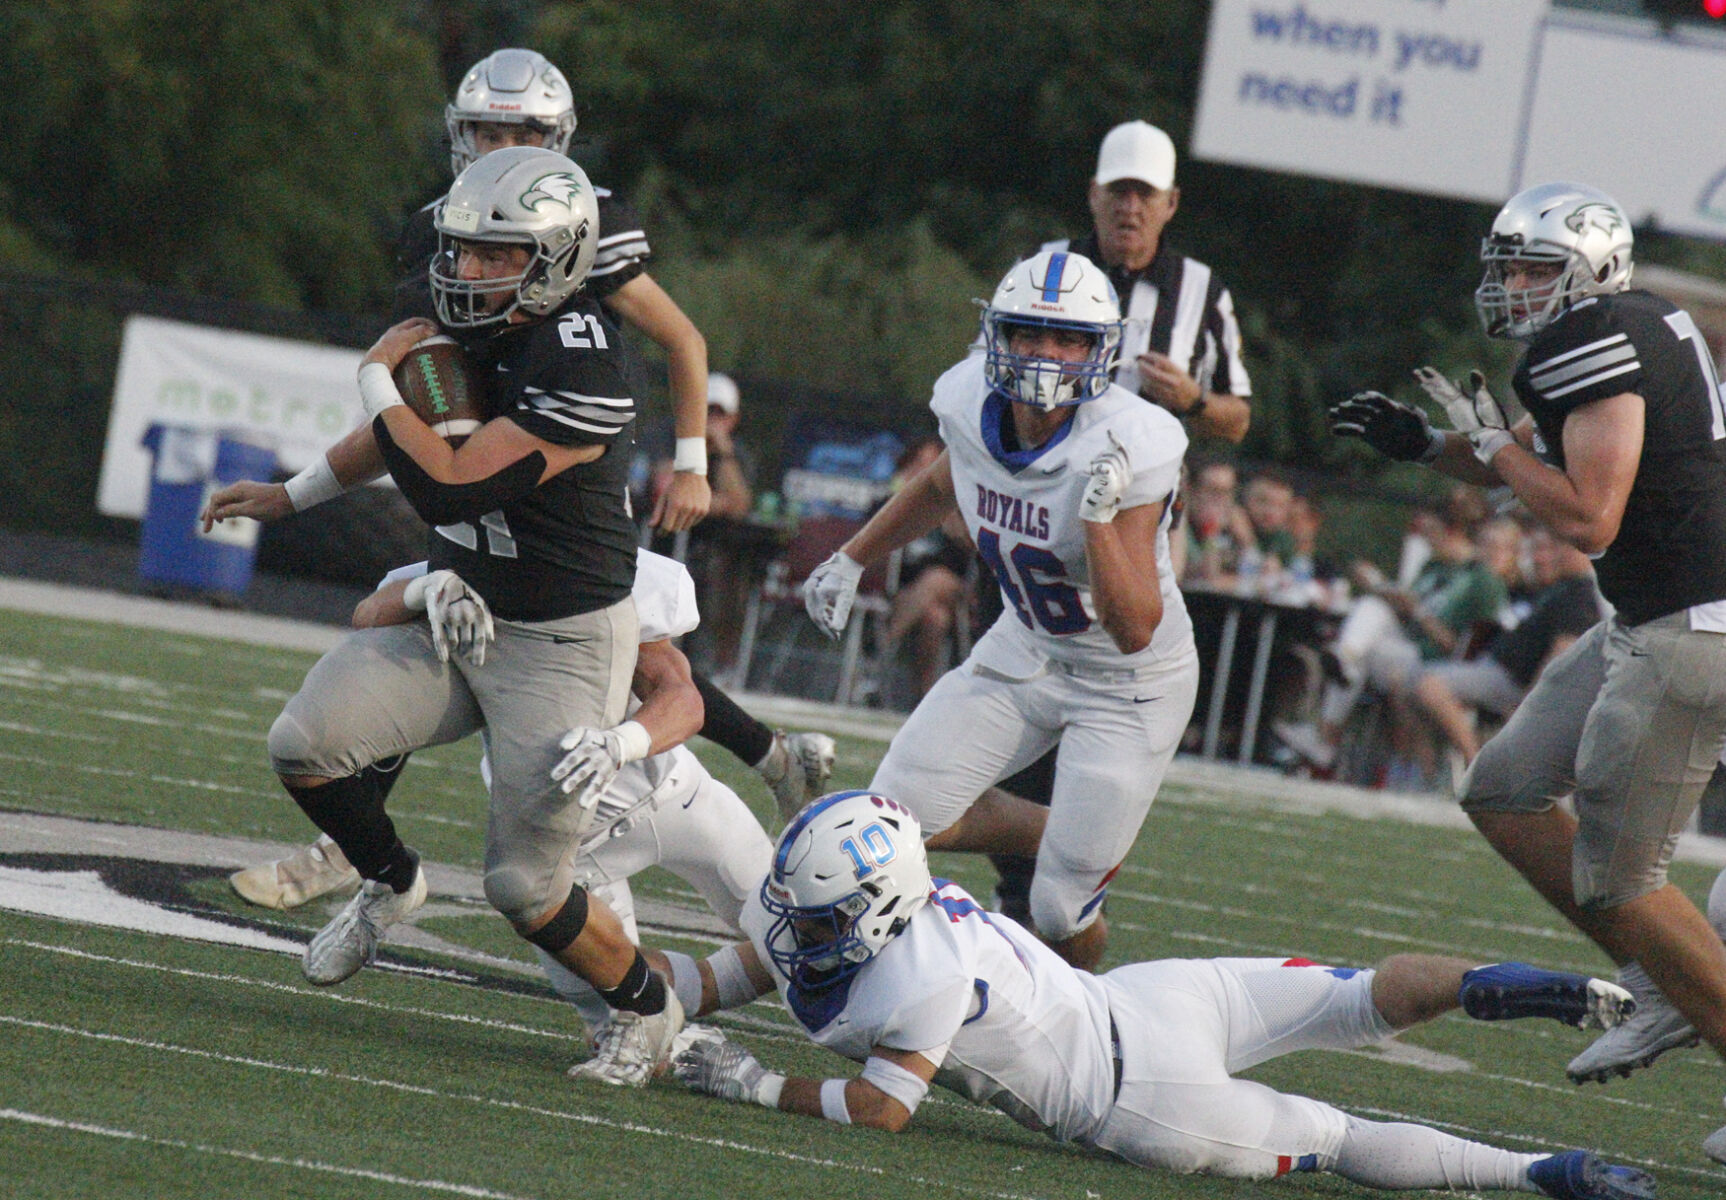 Zionsville Eagles put up a strong fight but fall to No. 6 ranked Hamilton Southeastern